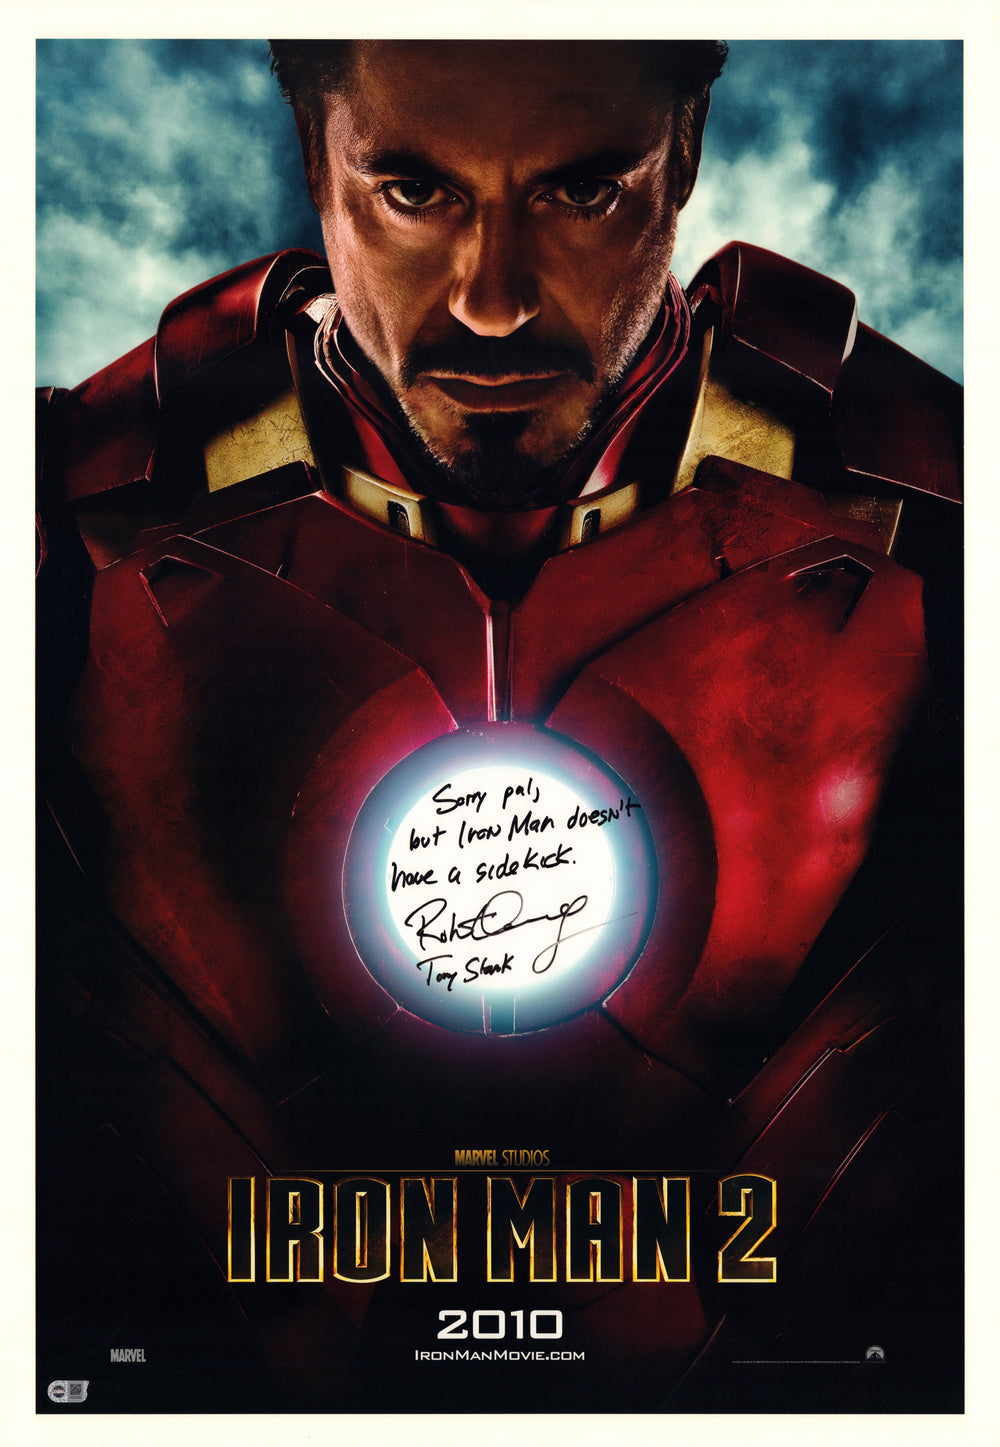 Robert Downey Jr. as Tony Stark in Iron Man 2 (SWAU) Signed 27x40 Poster with Character Name & Rare Long Quote